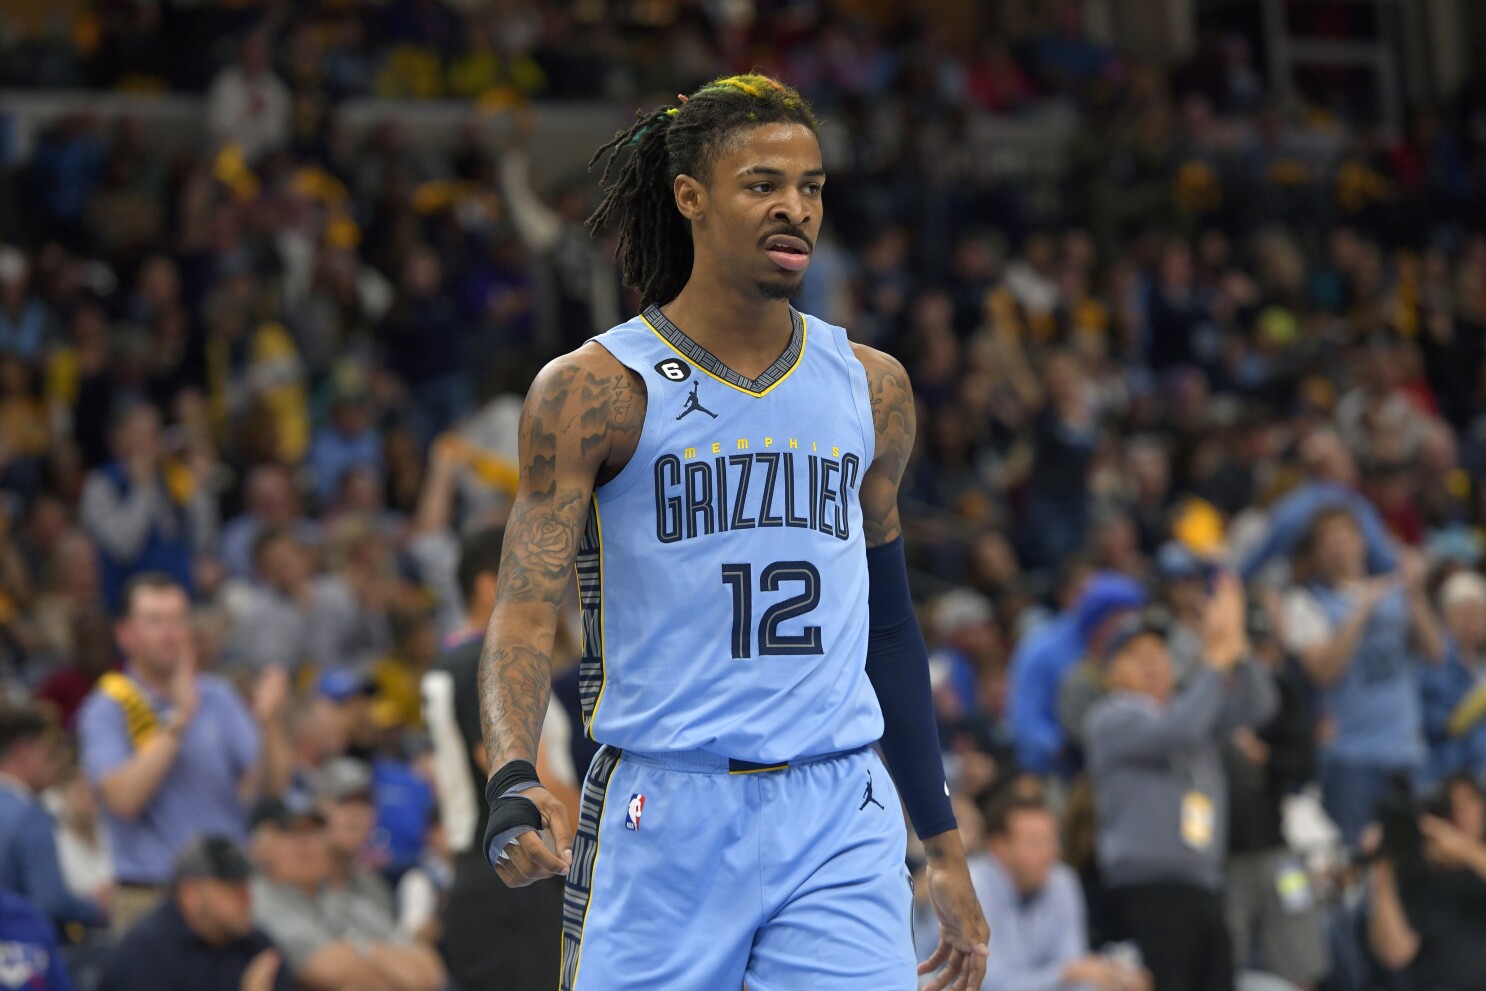 Southwest Division champ Grizzlies start without Morant, Spurs' Wembanyama  set for NBA debut